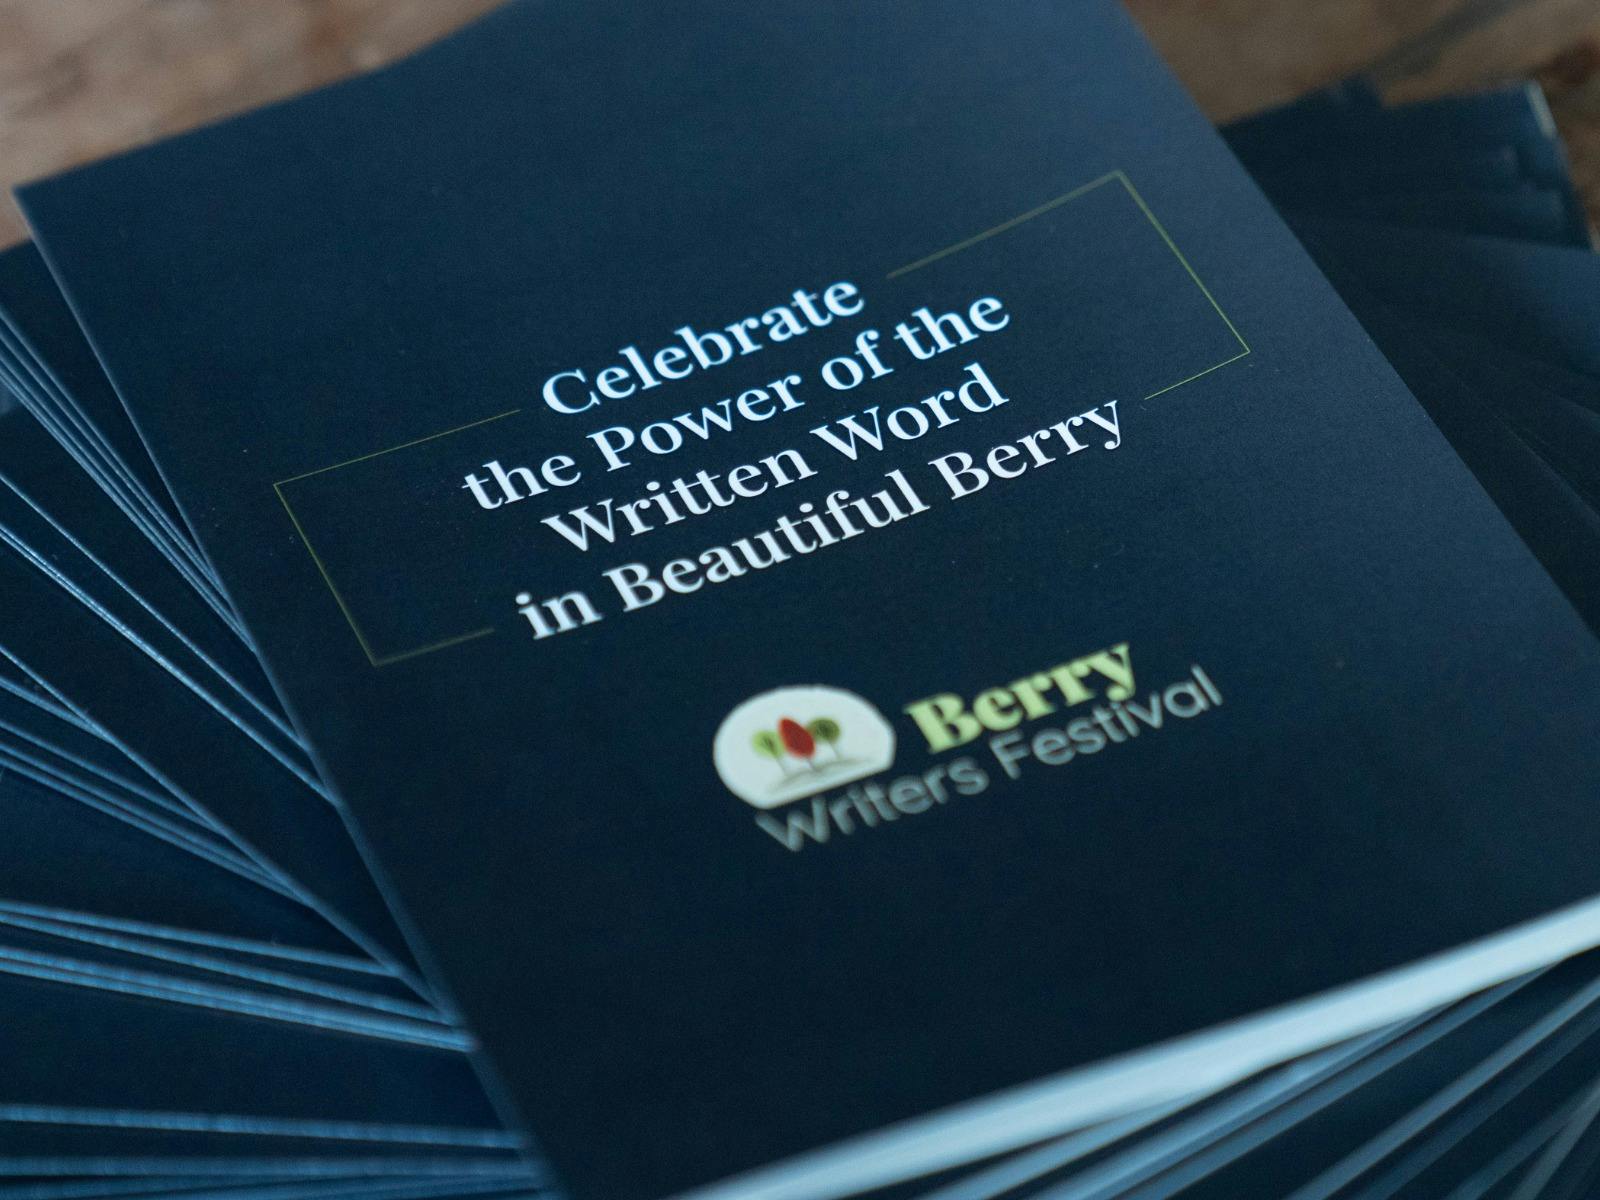 Celebrate the power of the written word in beautiful Berry